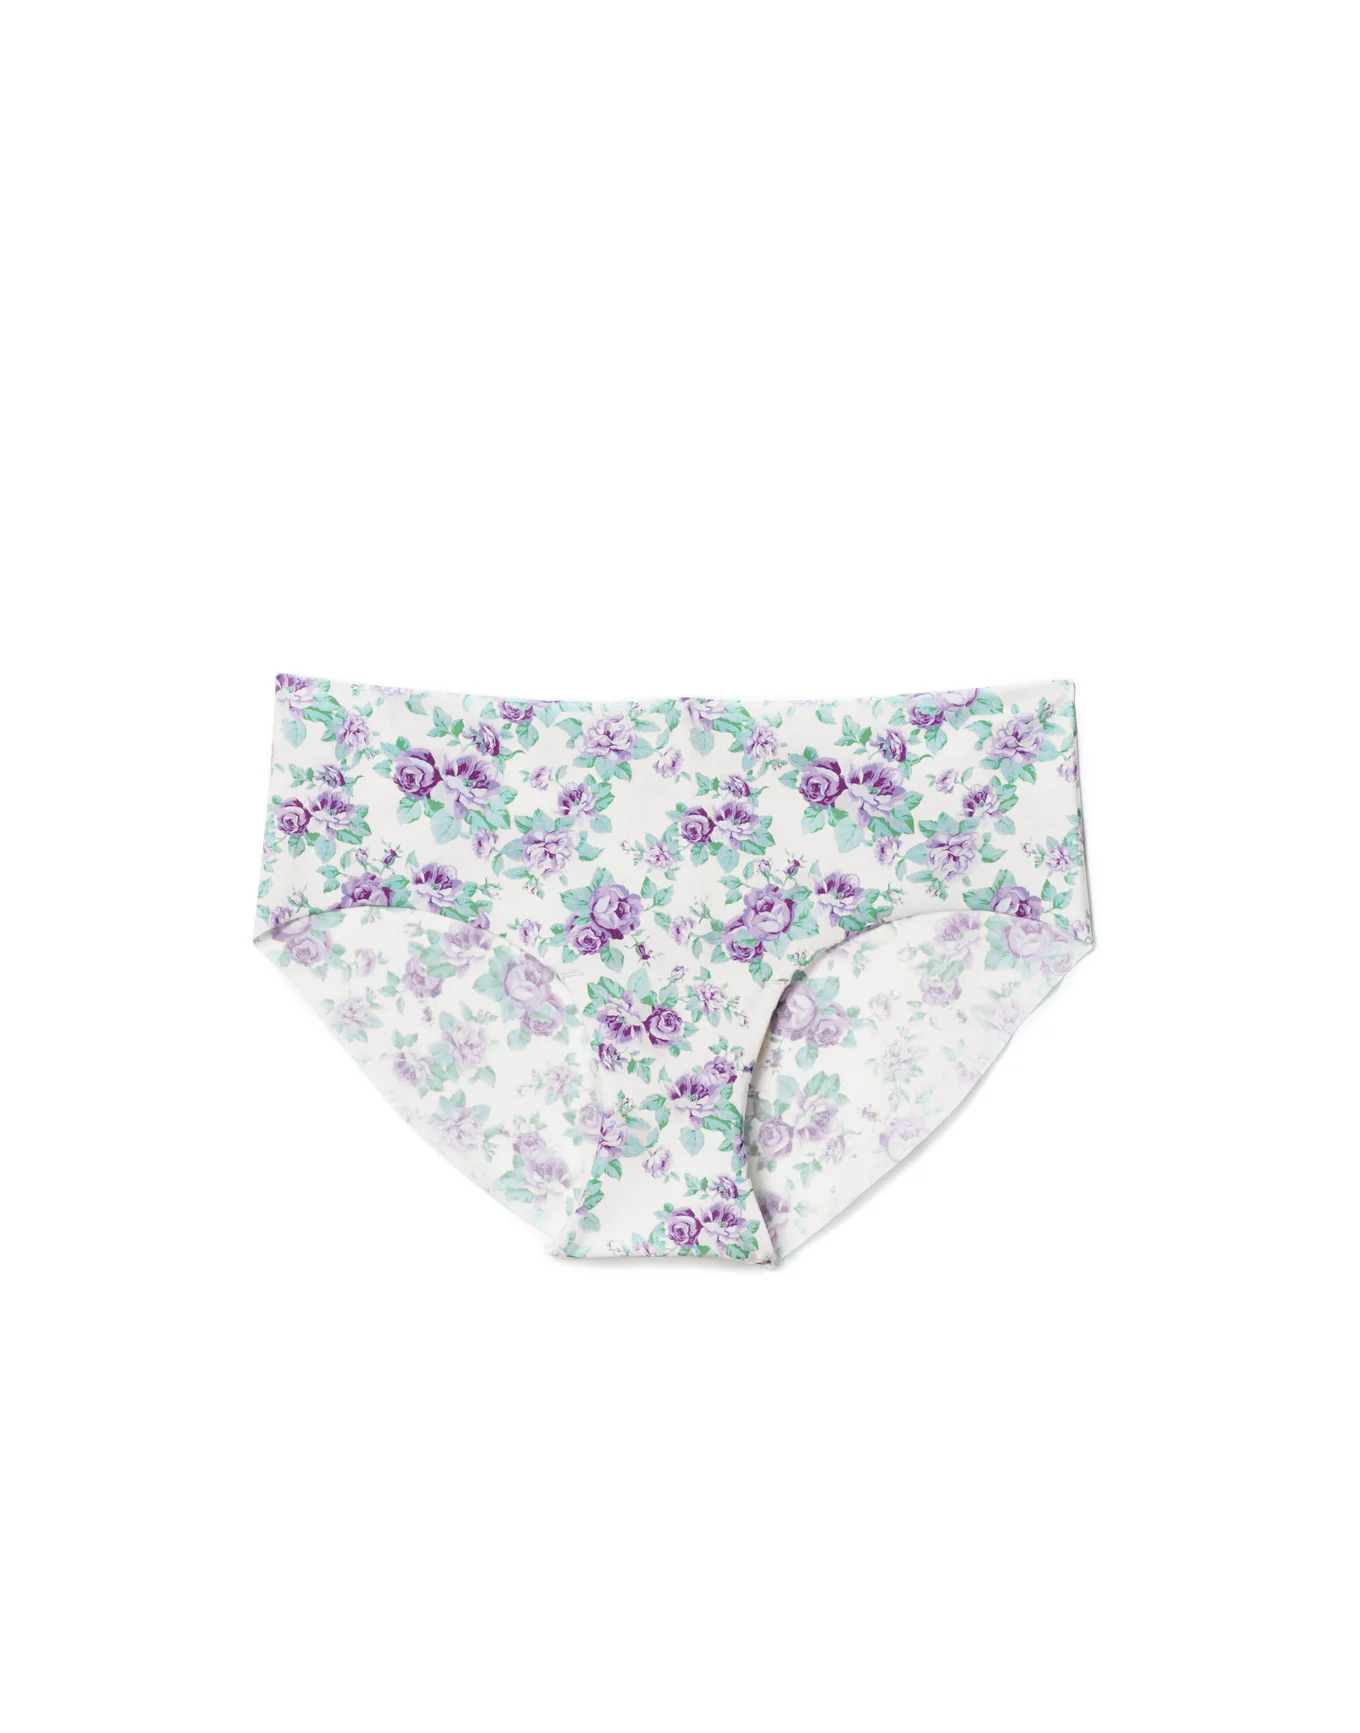 Leto Hipster Floral 2X Adore Plus 2 | Me Purple Hipster